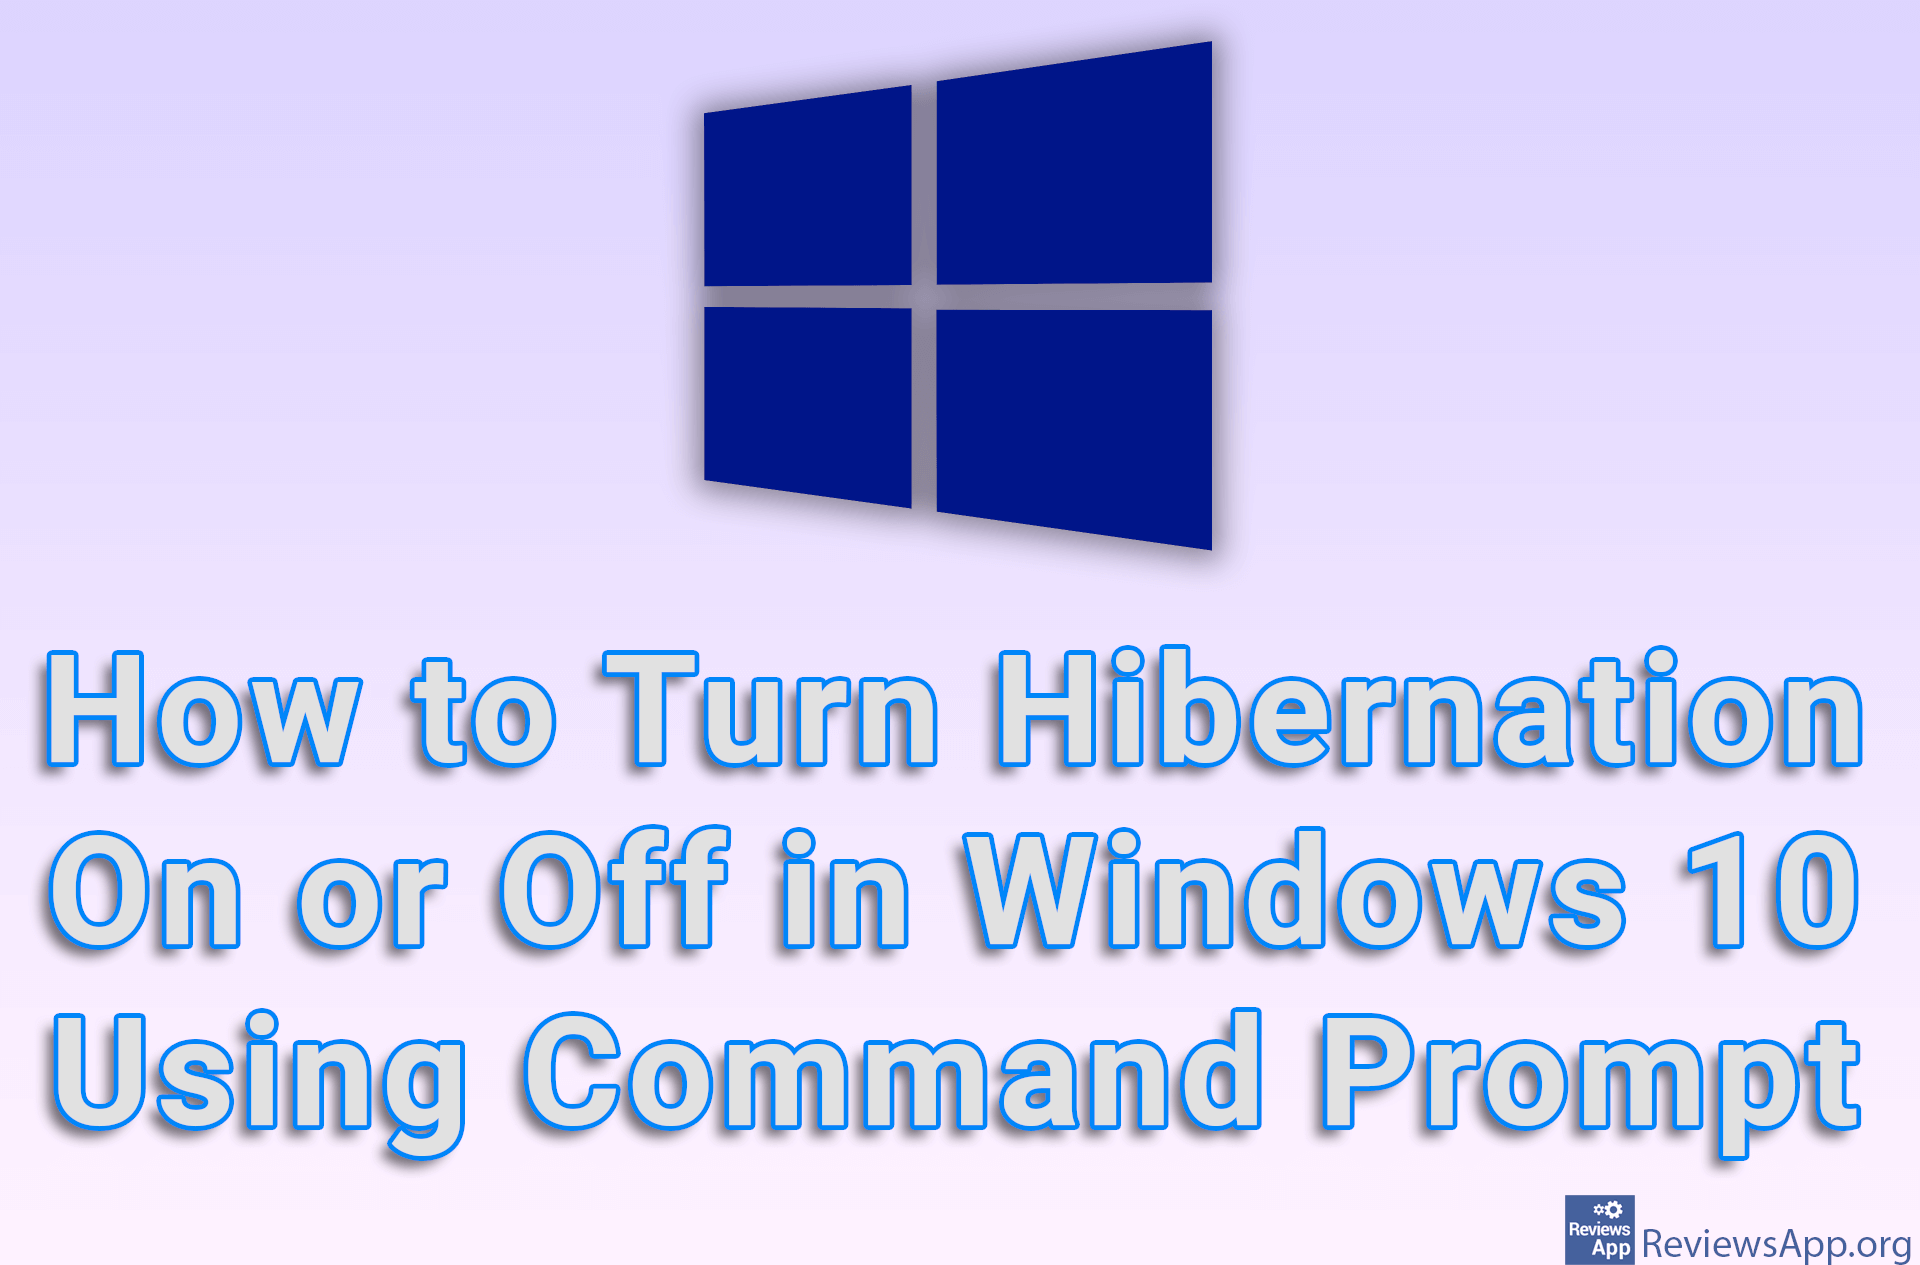 How to Turn Hibernation On or Off in Windows 10 Using Command Prompt